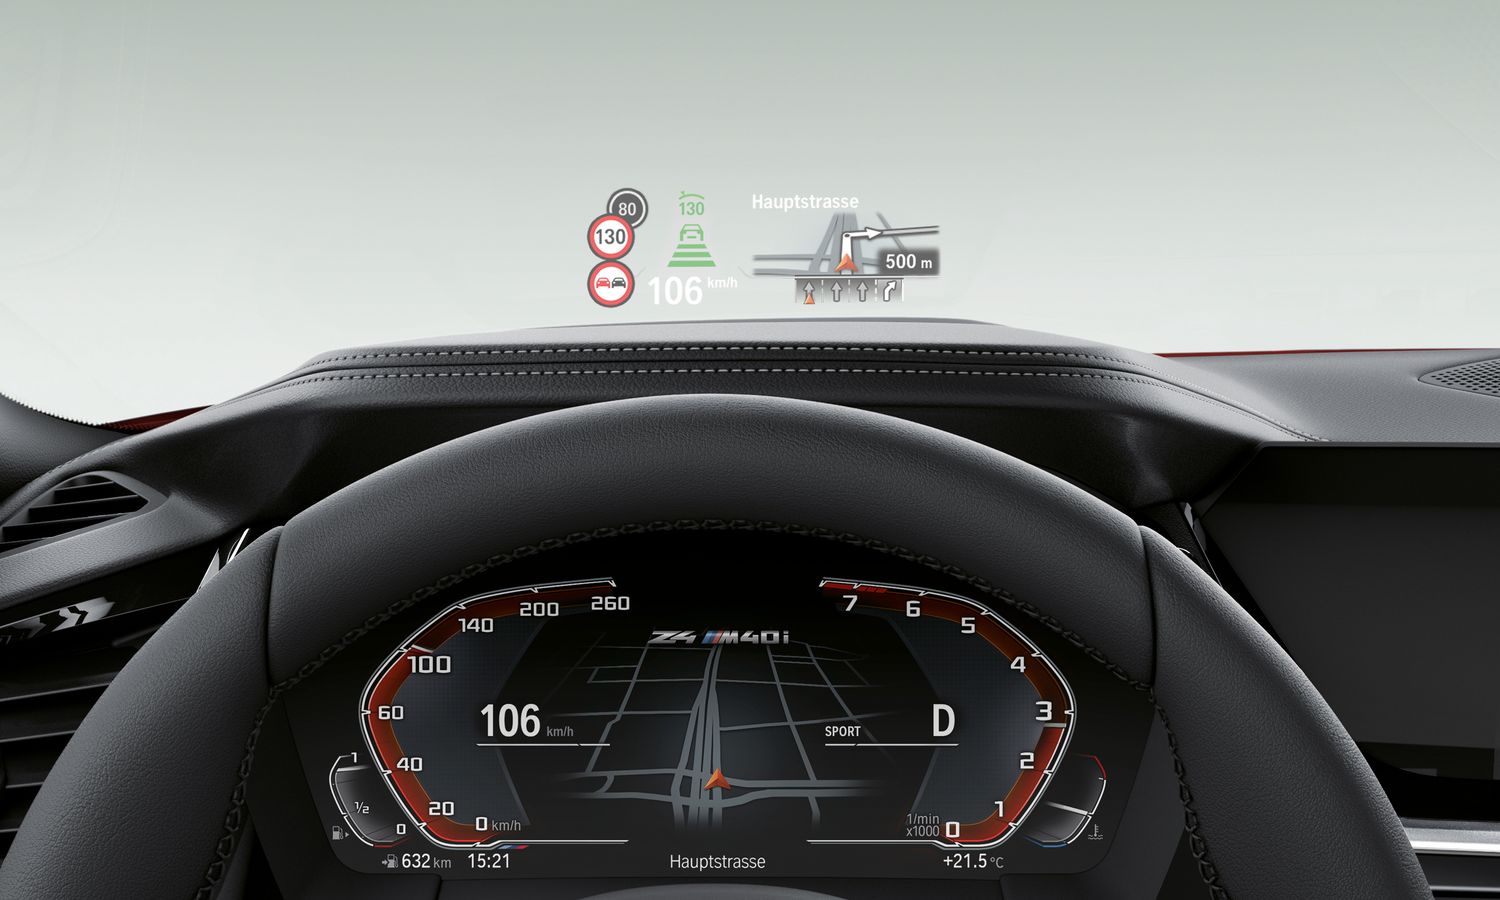 Notice the info-packed heads-up display reflected onto the windscreen.